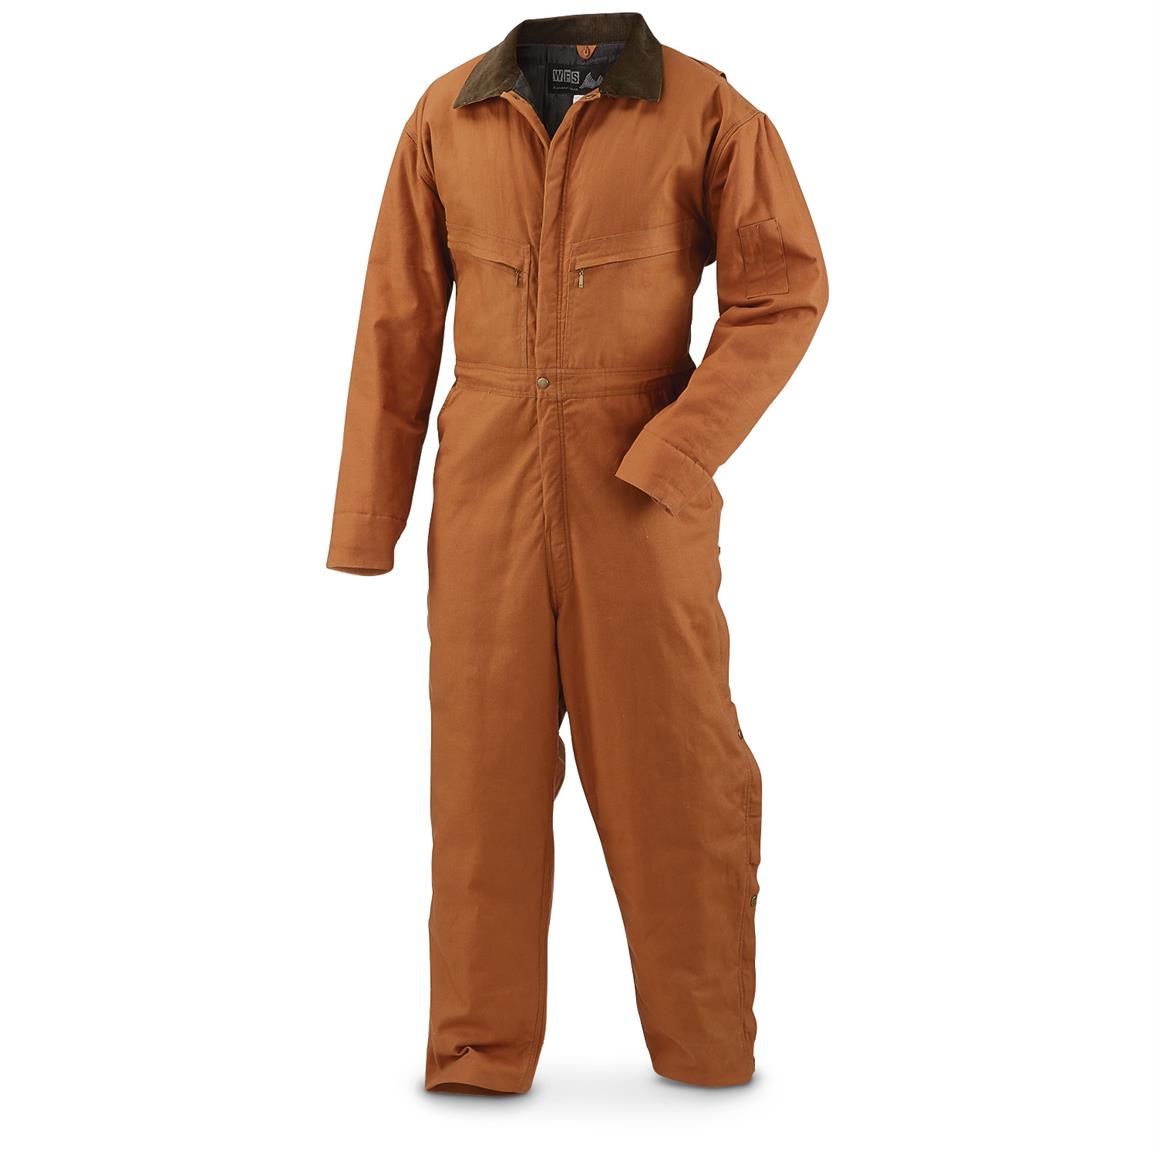 WFS Men's Canvas Insulated Coveralls - 649041, Insulated Pants ...